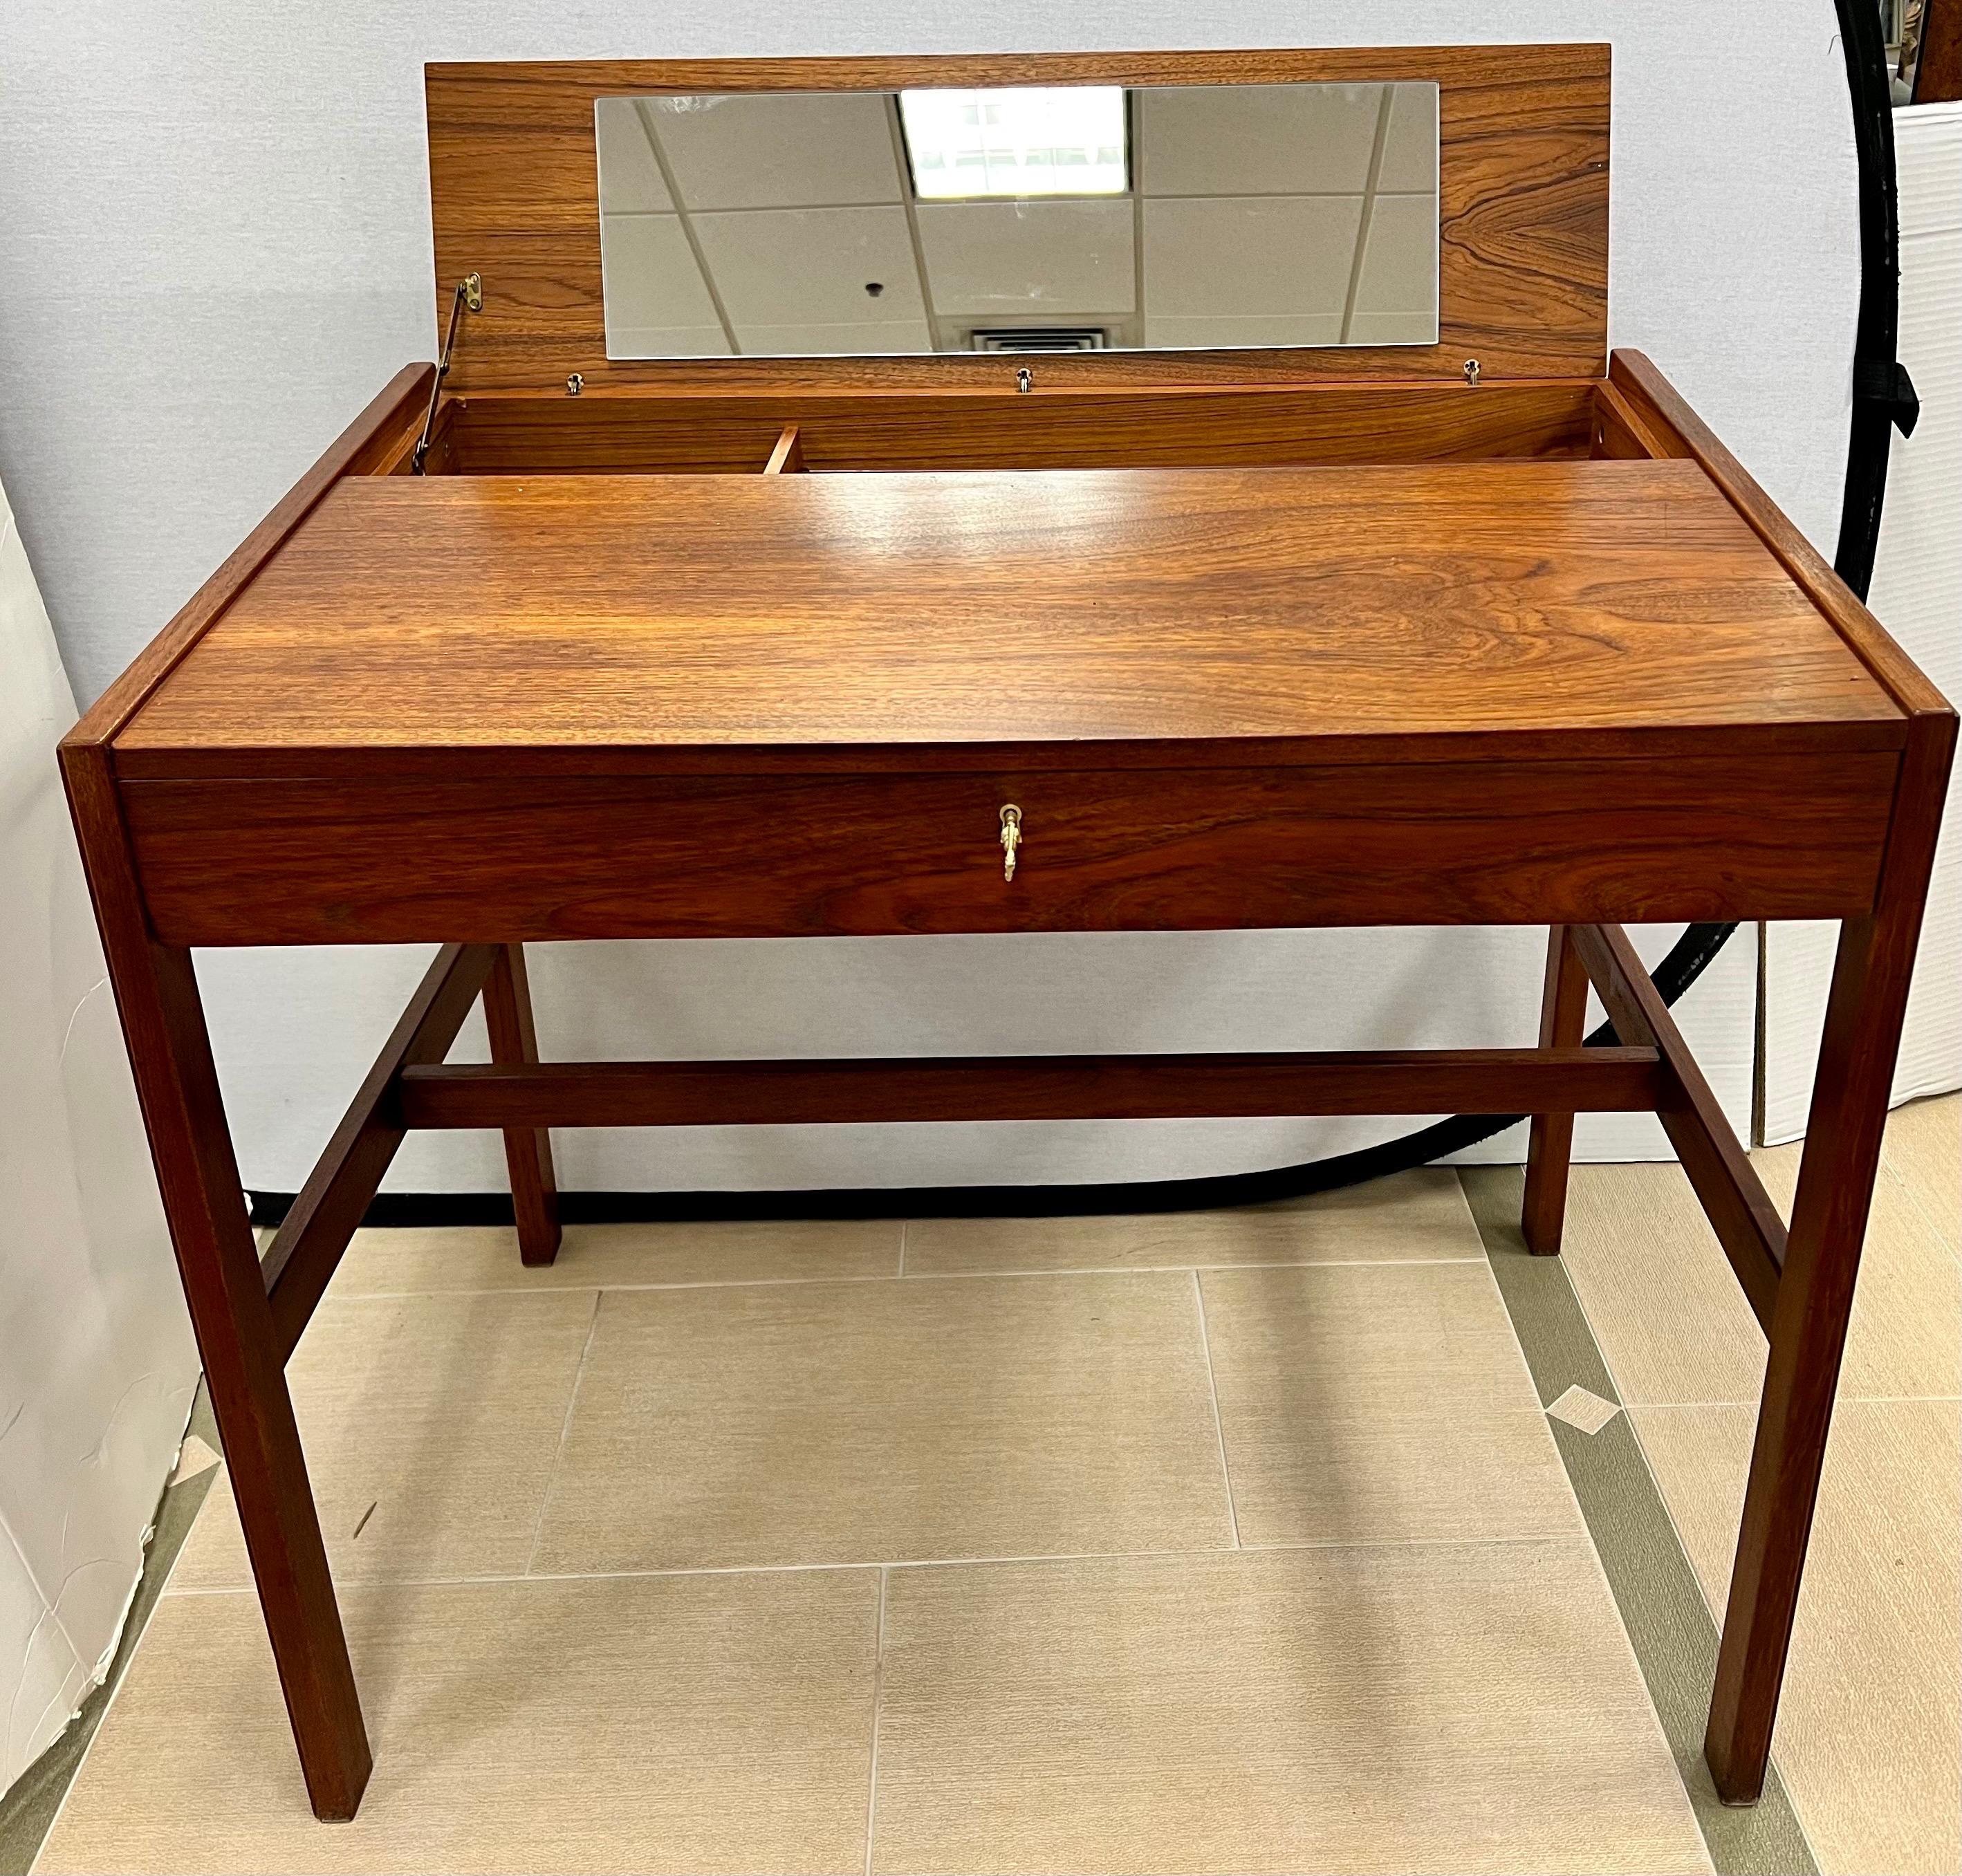 From Finland, this Arne Wahl Danish Control vanity desk features a lift up top with compartments and mirror underneath. Use as a vanity or a desk. Gorgeous lines and great scale. Rosewood throughout. Why not own the best?